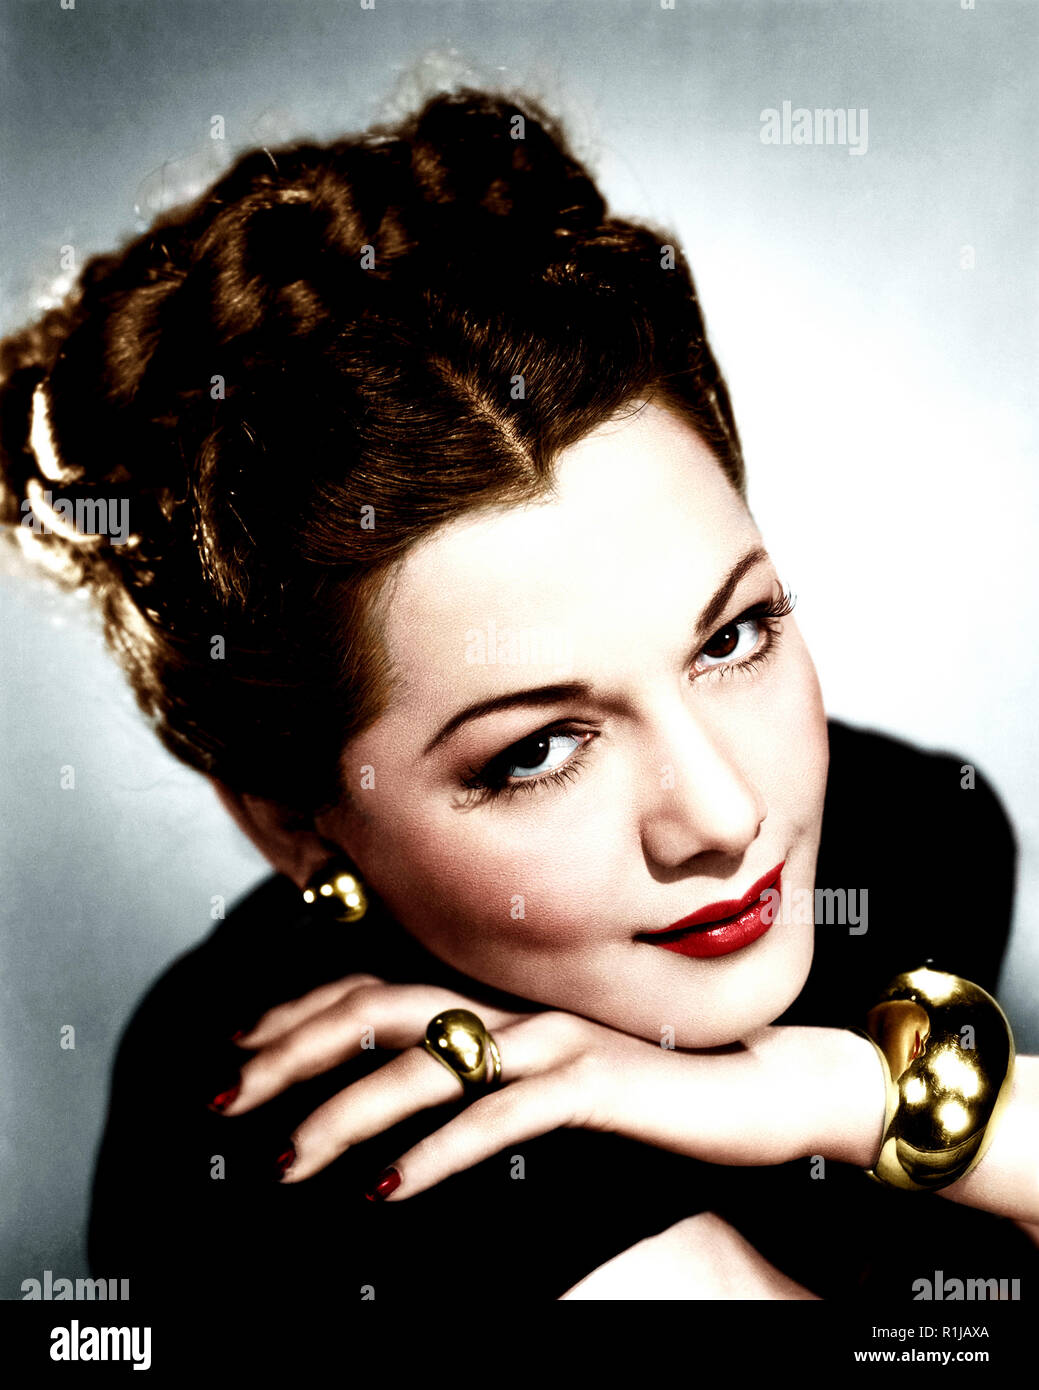 MarÌa ¡frica Gracia Vidal (6 June 1912 ñ 7 September 1951), known as The Queen of Technicolor, was a Dominican motion picture actress who gained fame and popularity in the 1940s as an exotic beauty starring in a series of filmed-in-Technicolor costume adventure films. Her screen image was that of a hot-blooded Latin seductress, dressed in fanciful costumes and sparkling jewels. She became so identified with these adventure epics that she became known as 'The Queen of Technicolor'. Over her career, Montez appeared in 26 films, 21 of which were made in North America and the last five were made i Stock Photo